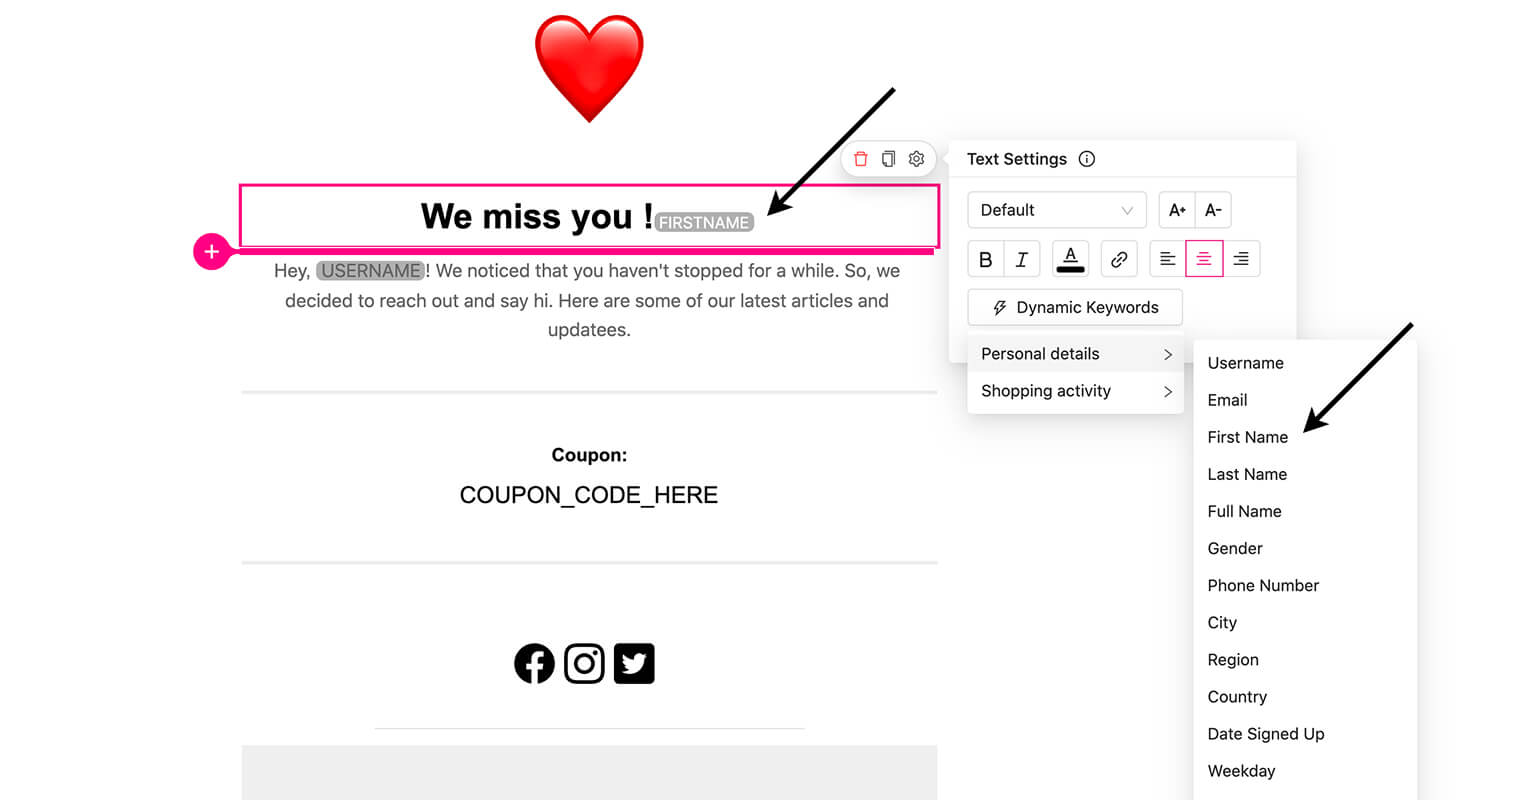 personalize content with dynamic keywords - greeting - emails